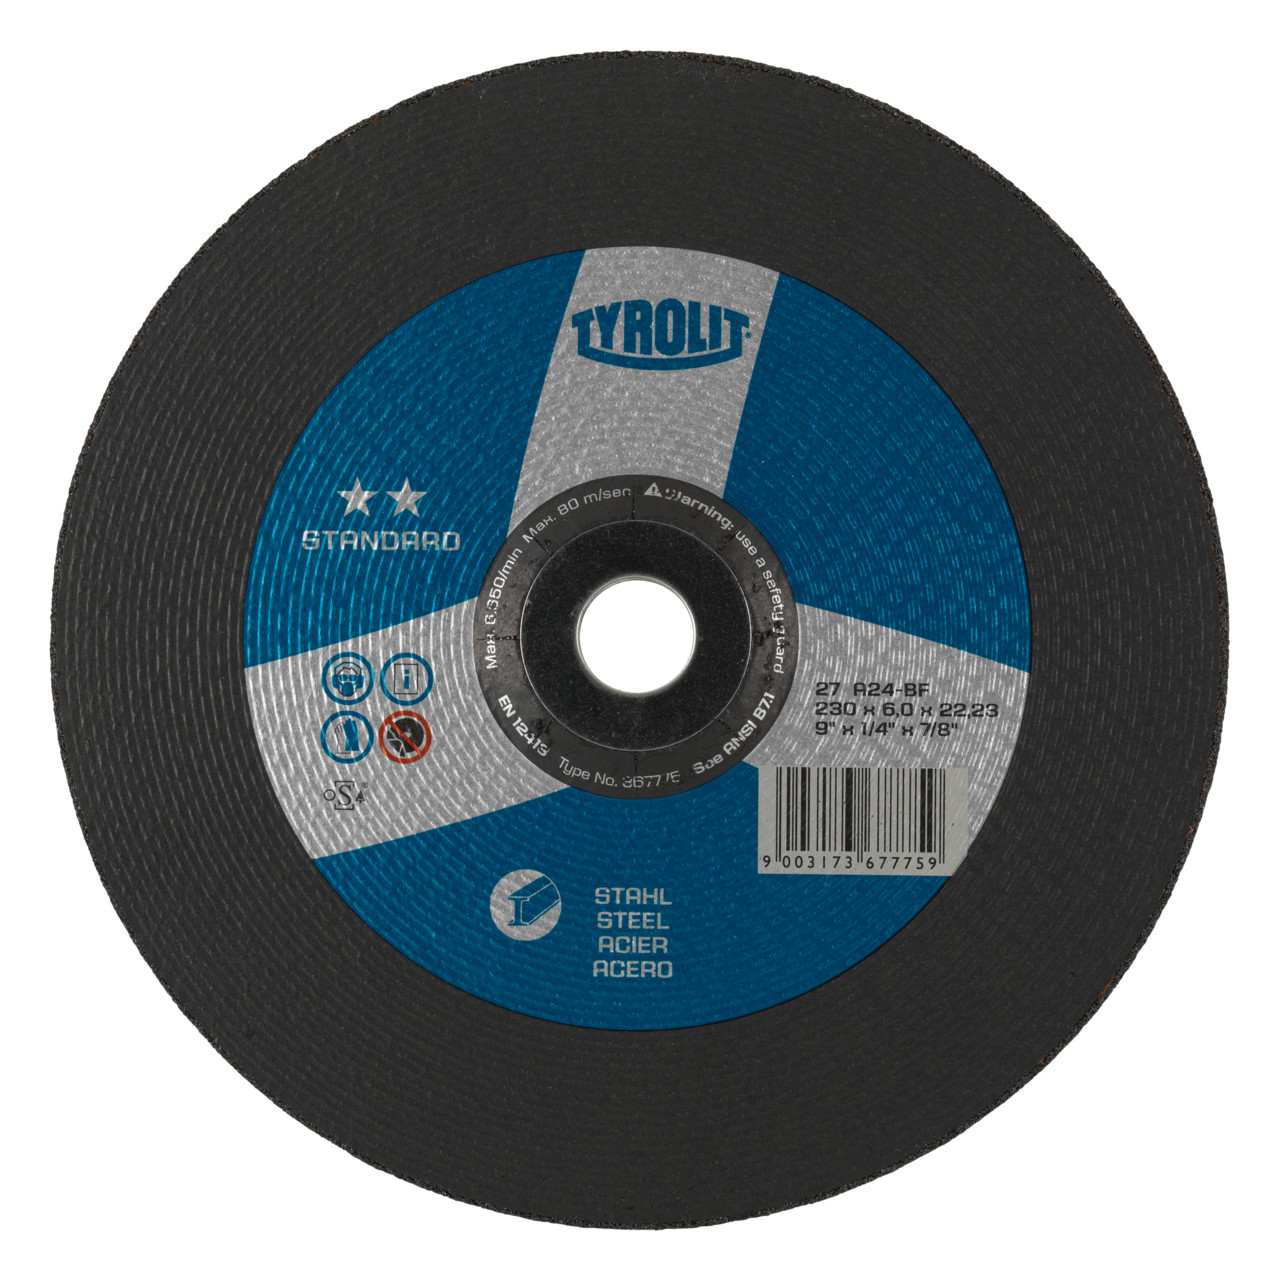 Tyrolit Roughing disc DxUxH 115x6x22.23 For steel, shape: 27 - offset version, Art. 367377